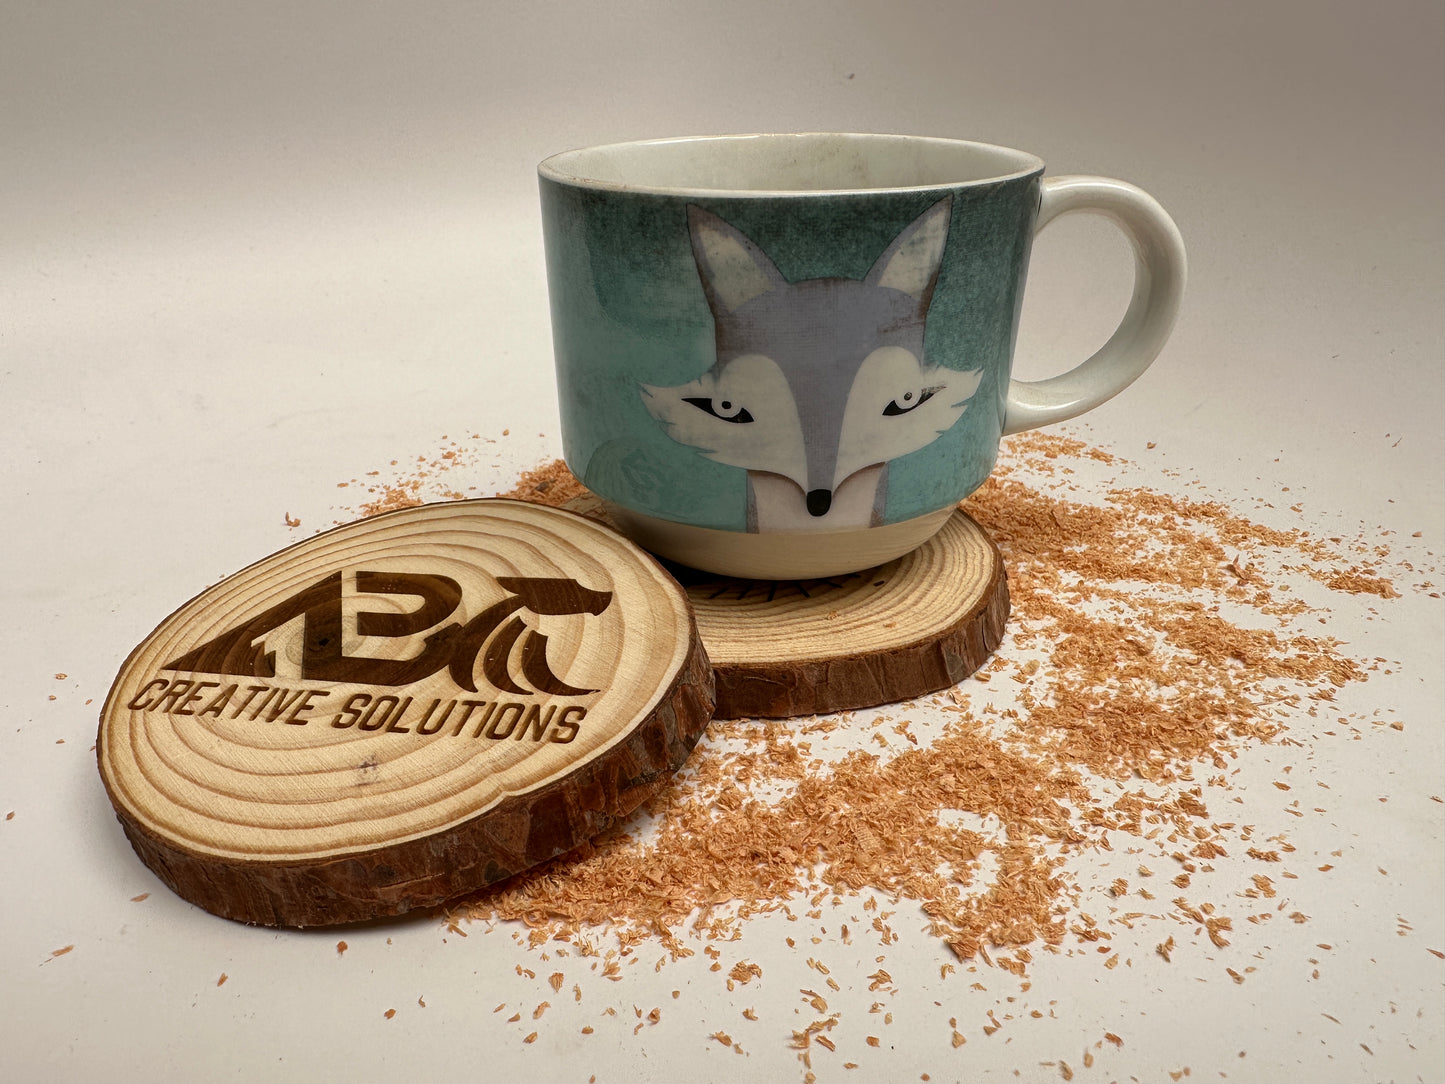 Wooden coaster with a coffee cup on top and a second coaster engraved with the ABC Creative Solutions logo